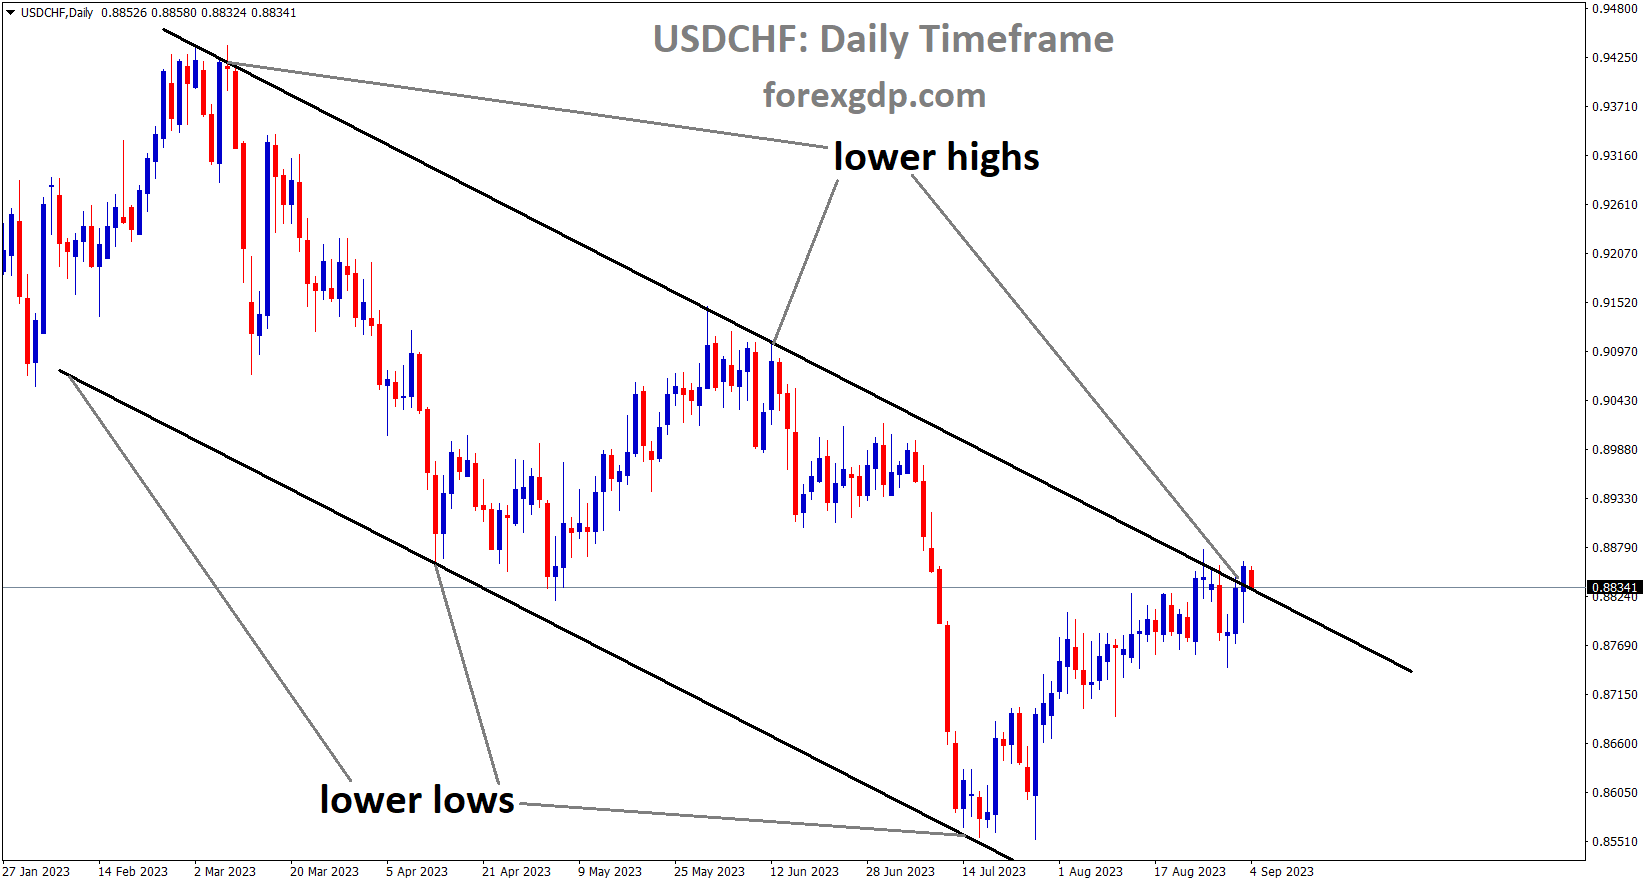 USDCHF is moving in the Descending channel and the market has reached the lower high area of the pattern